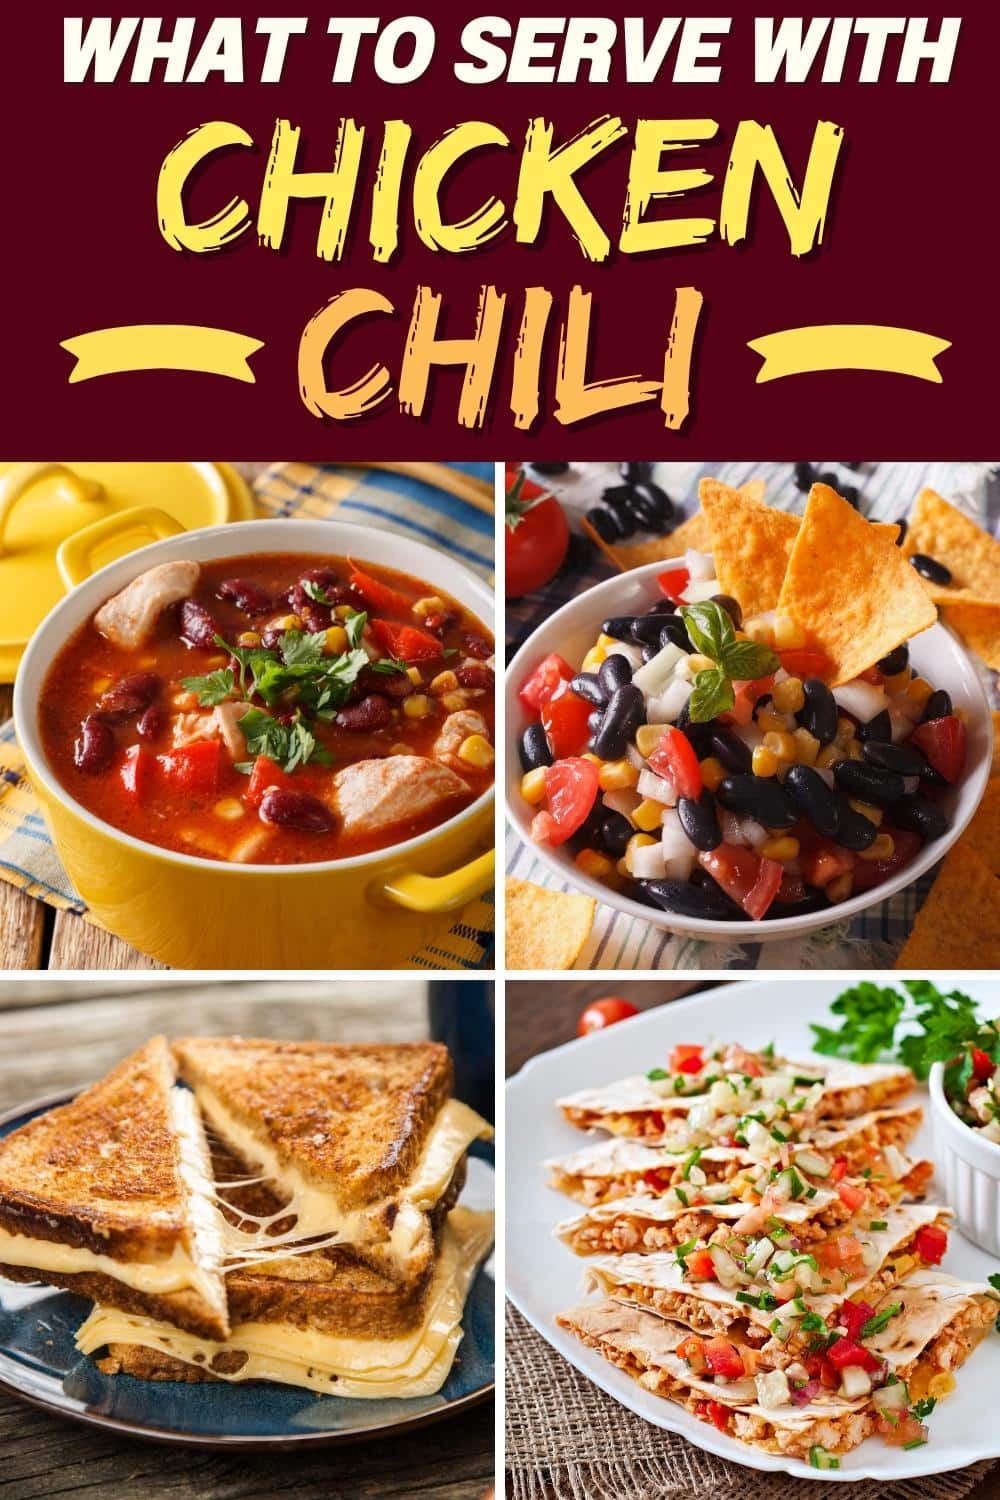 What to Serve with Chicken Chili